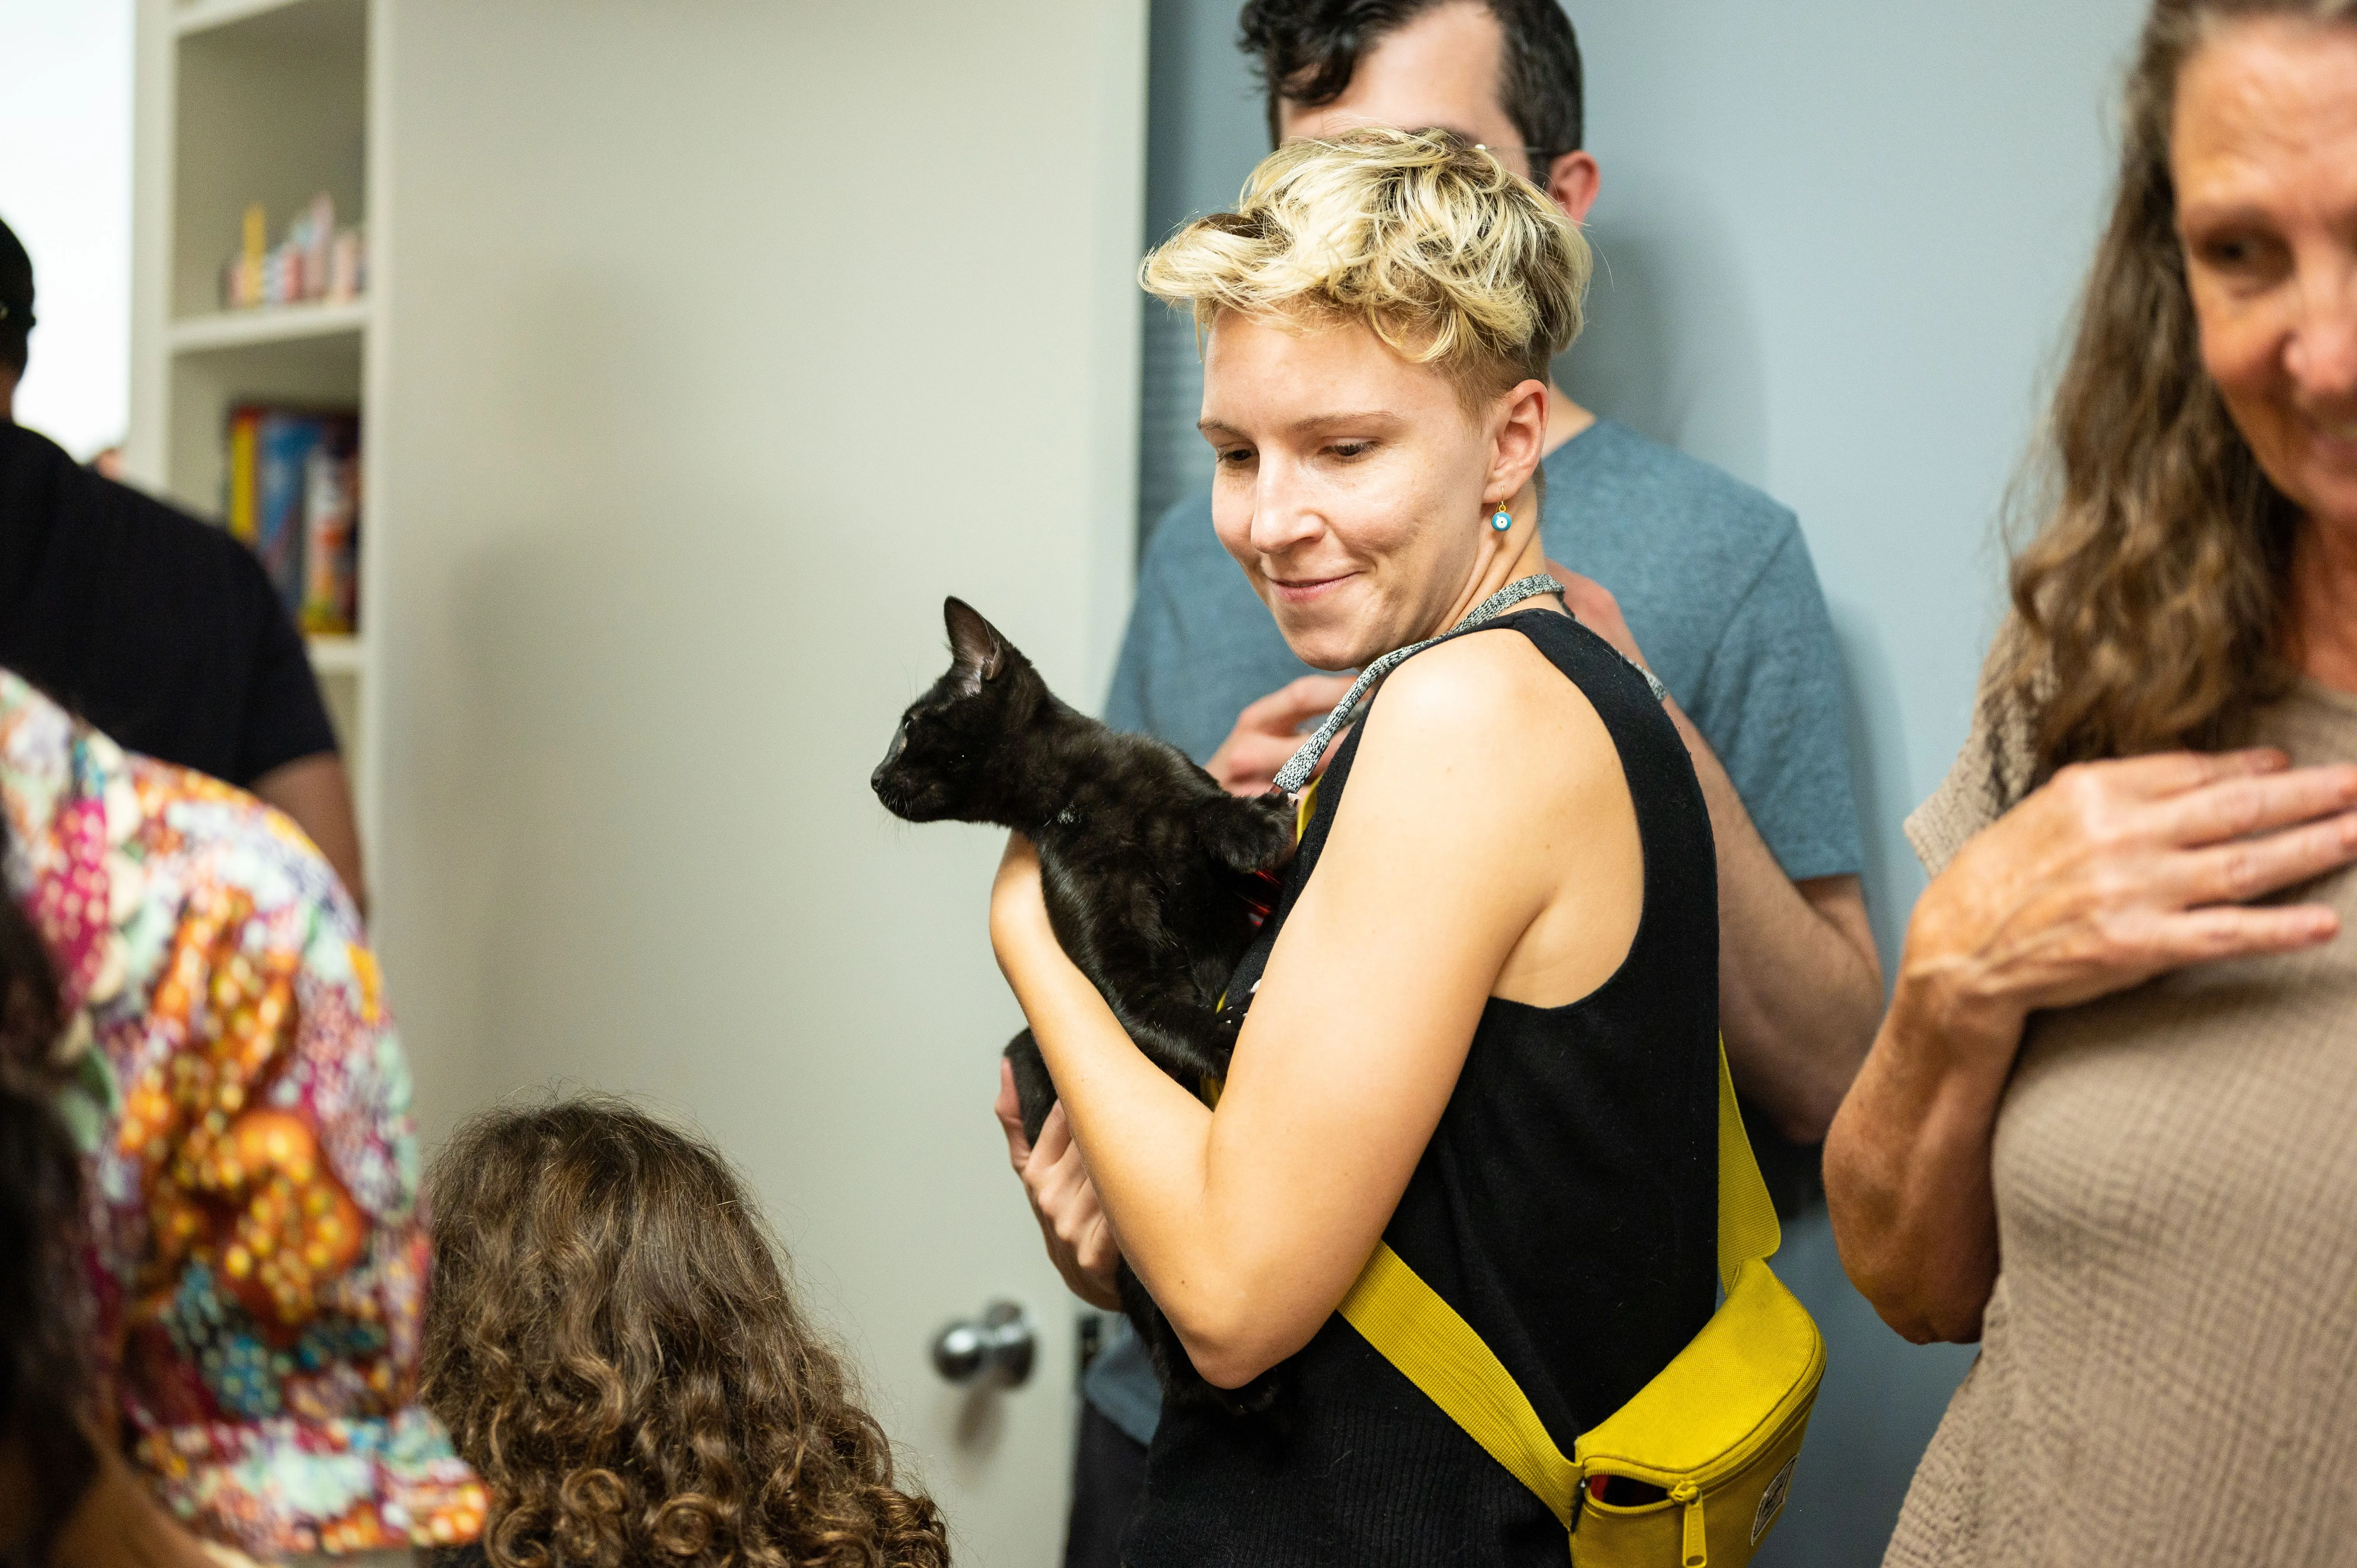 Woman smiling and holding a black cat in a room with other people.